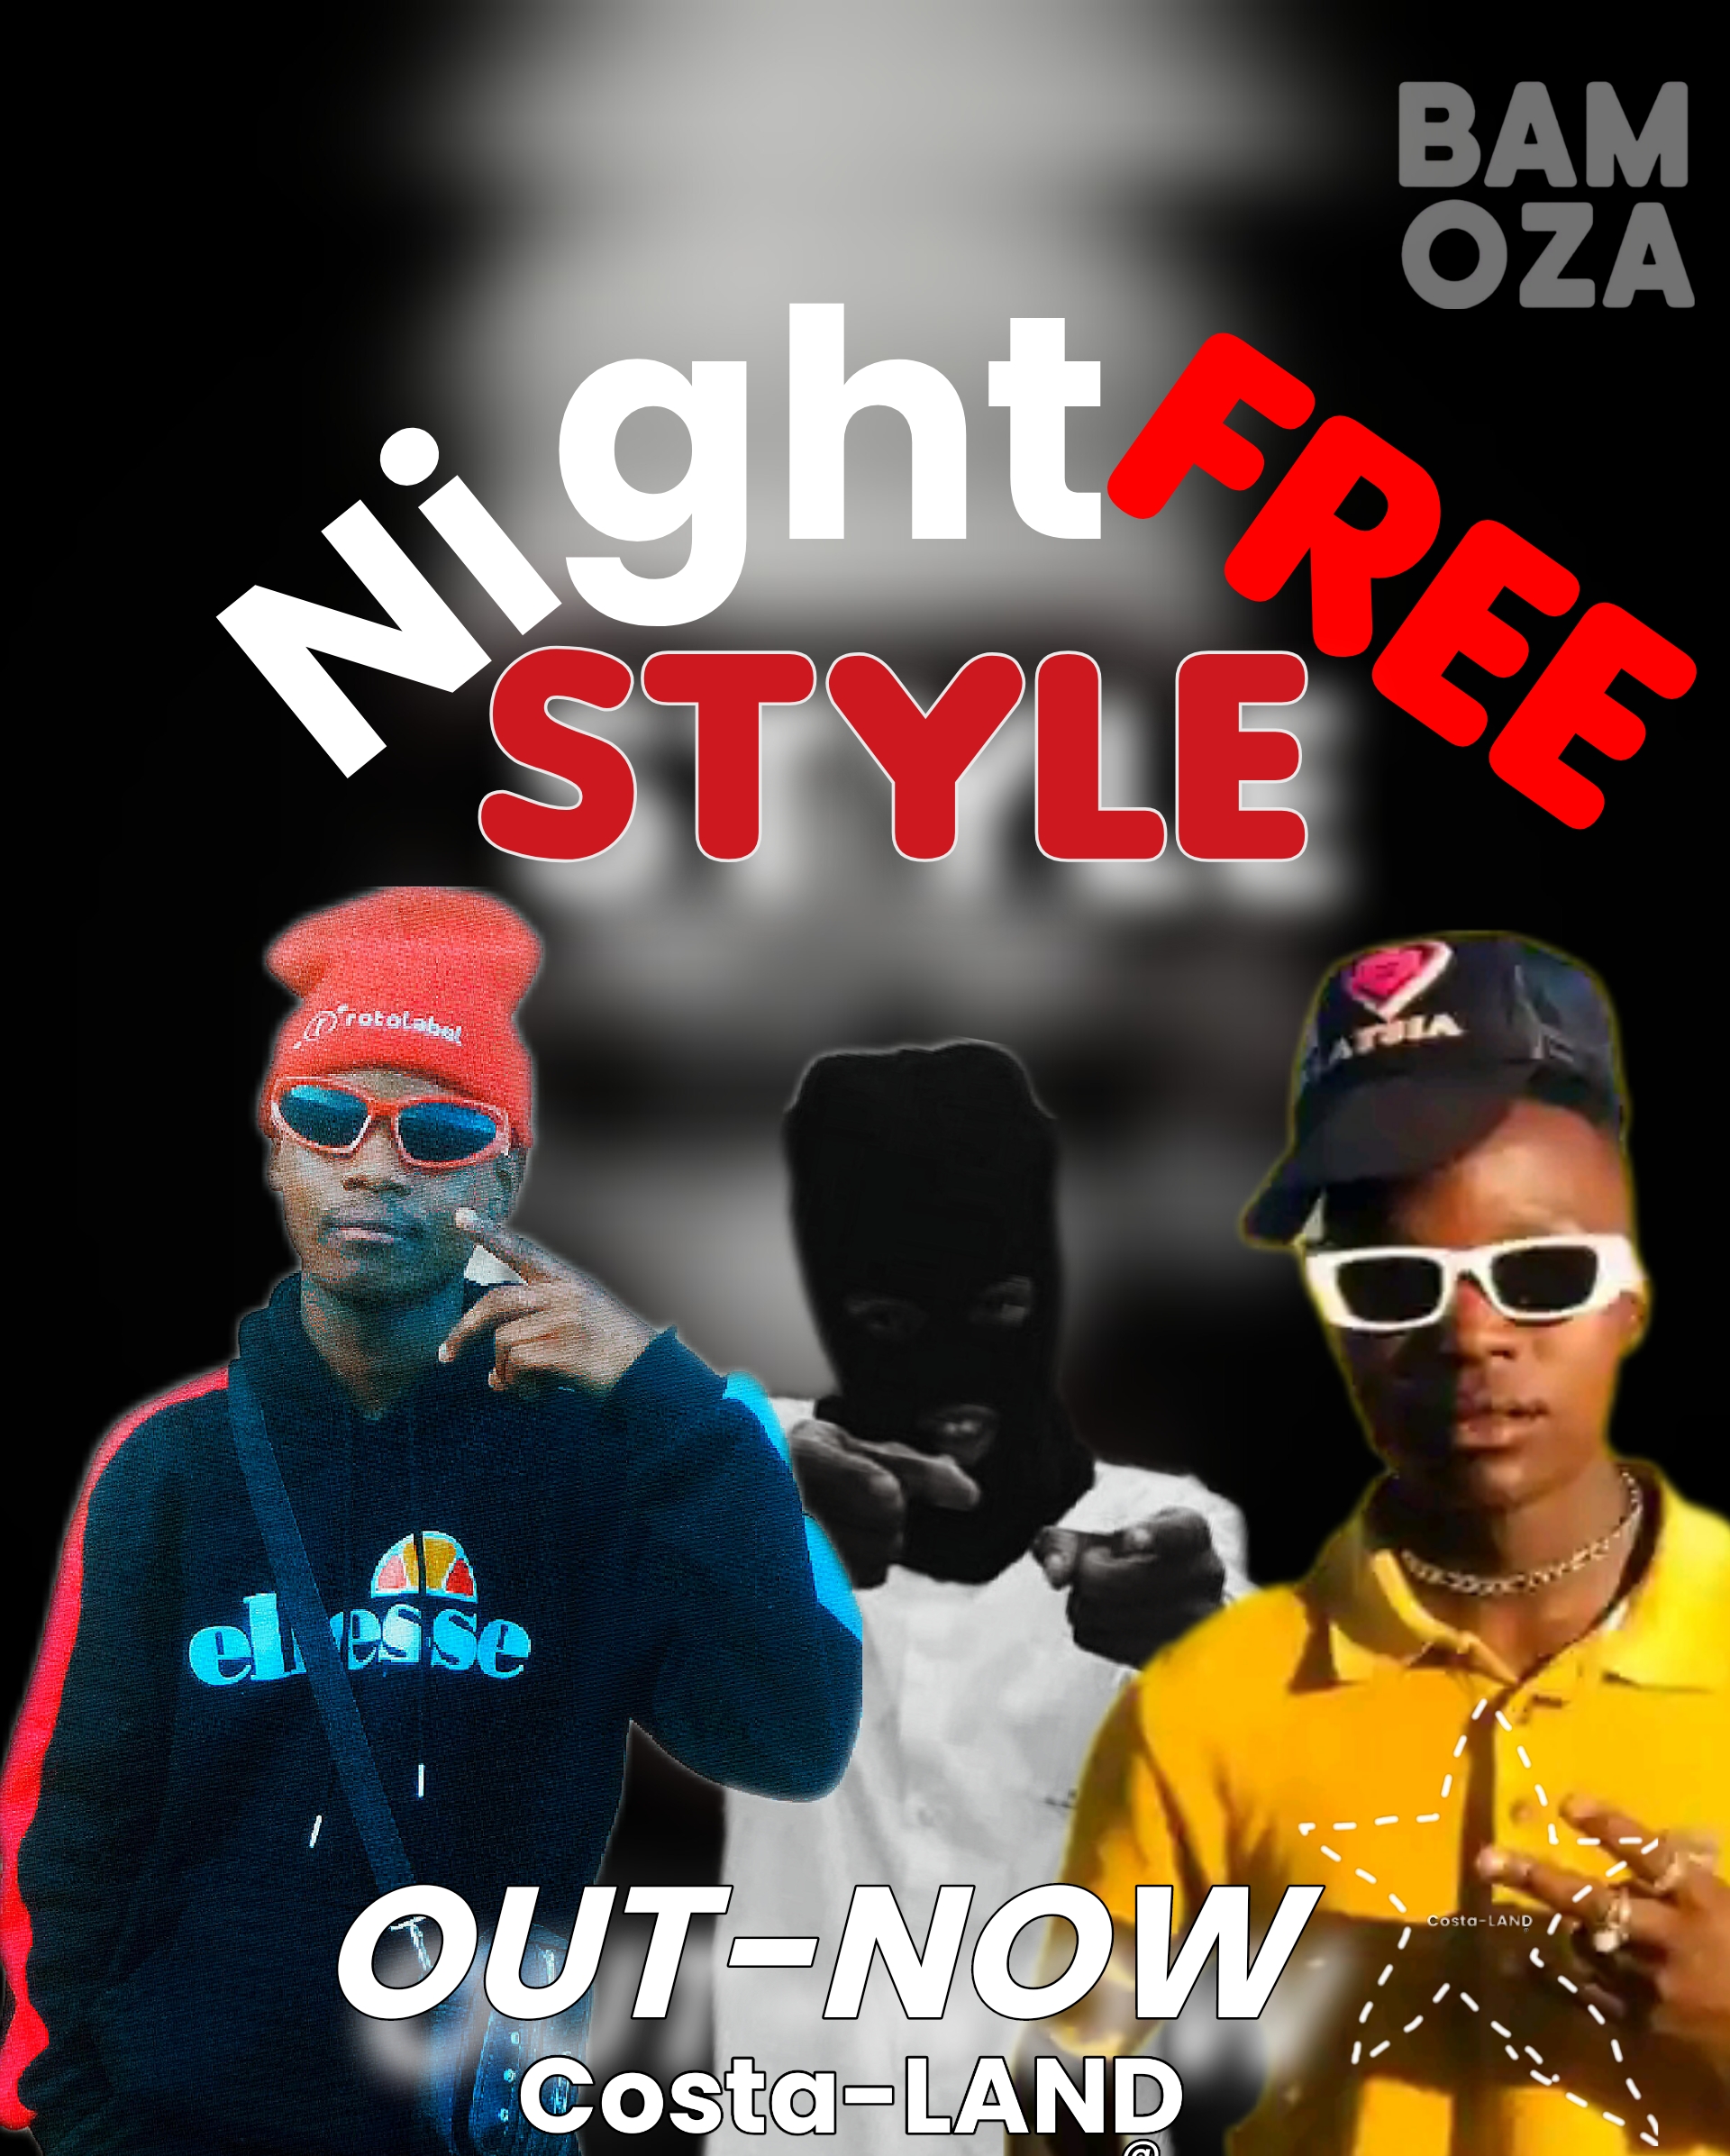 Night freestyle (Official Music) - Ibhuda AT x Browns x A-T Toolz